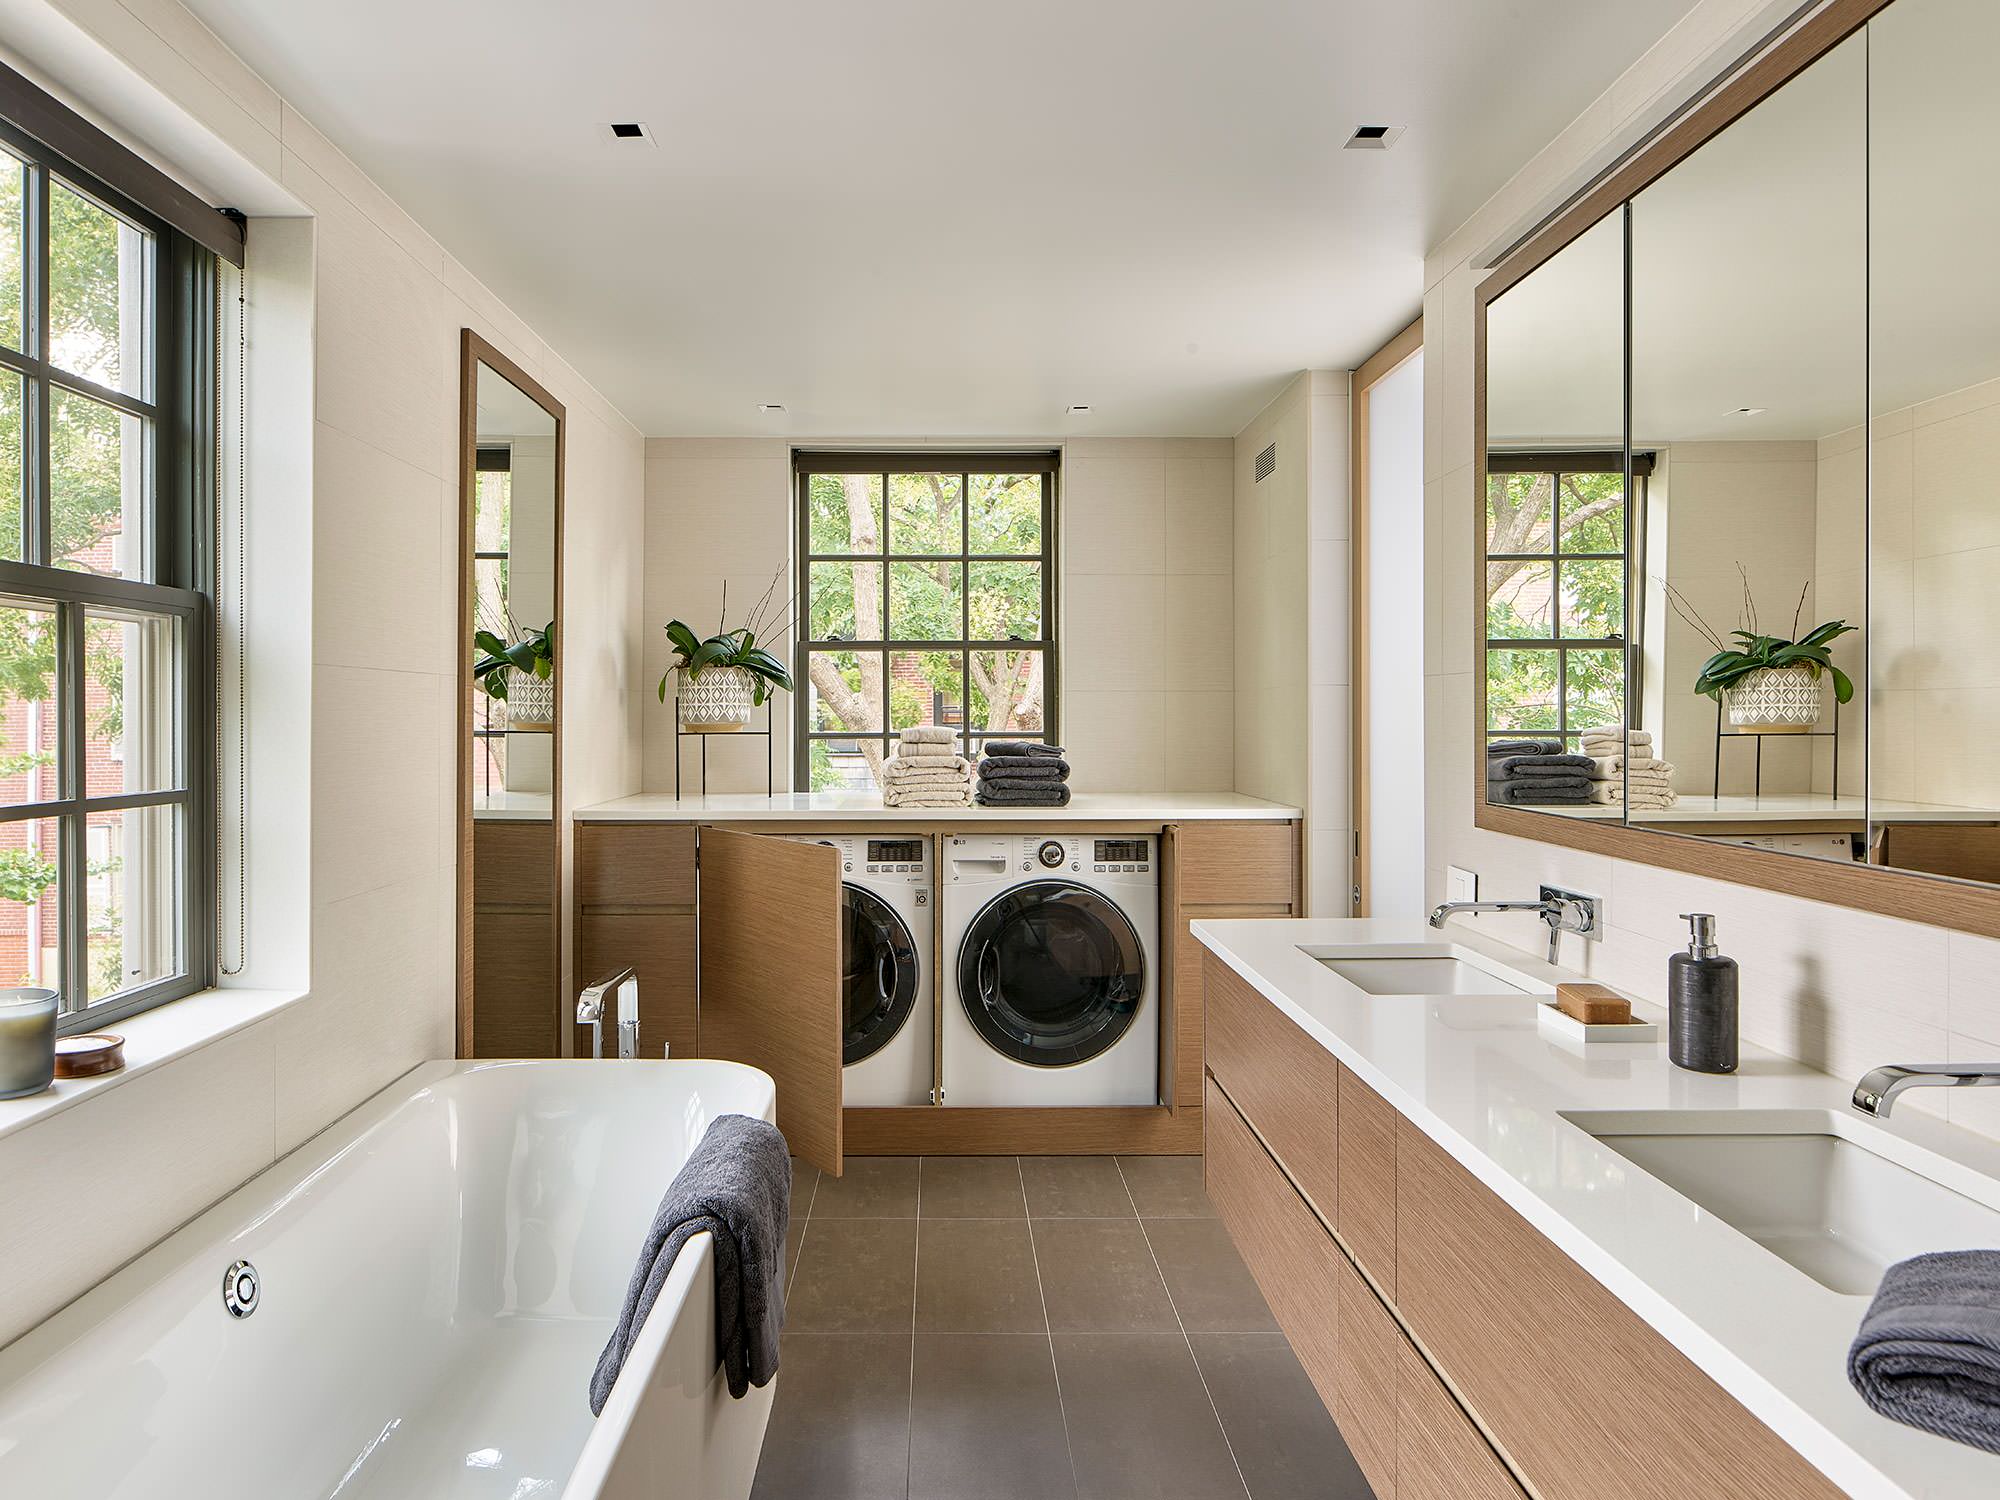 75 Beautiful Bathroom/Laundry Room Pictures &Amp; Ideas - April, 2021 | Houzz